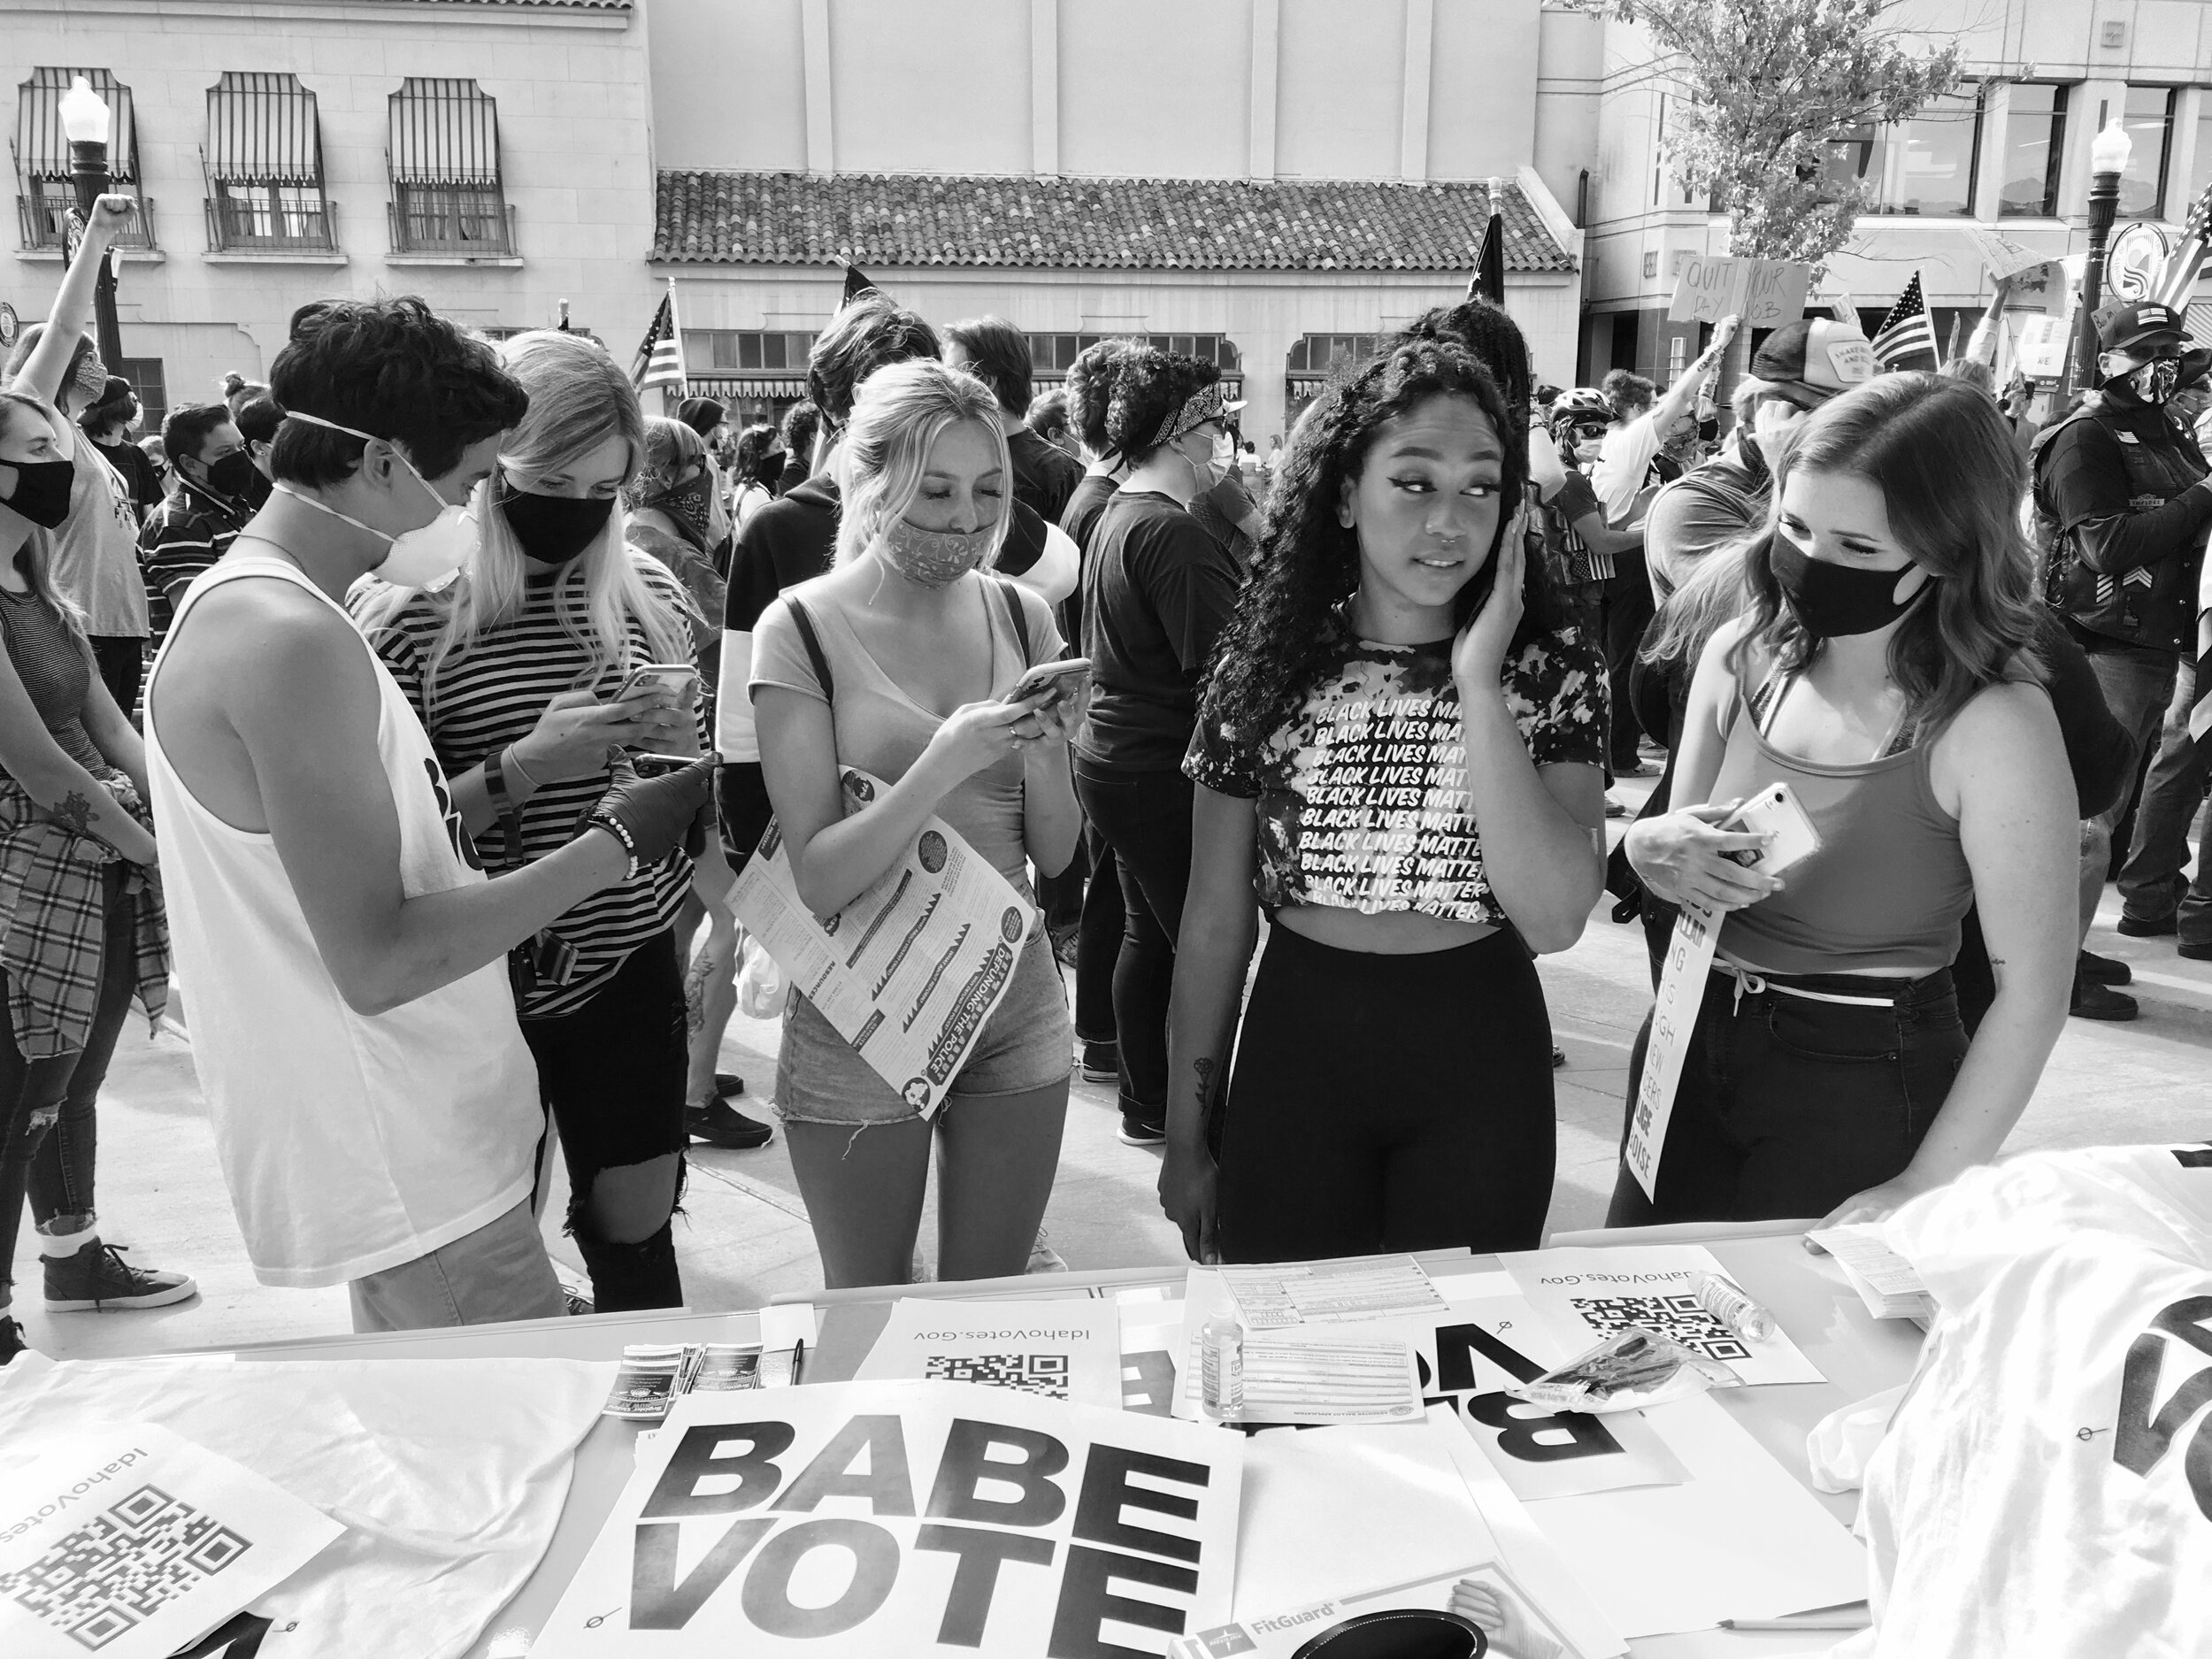 BABEVOTE volunteers, too young to vote themselves, are out registering voters at rallies & protests. #BABEVOTE 